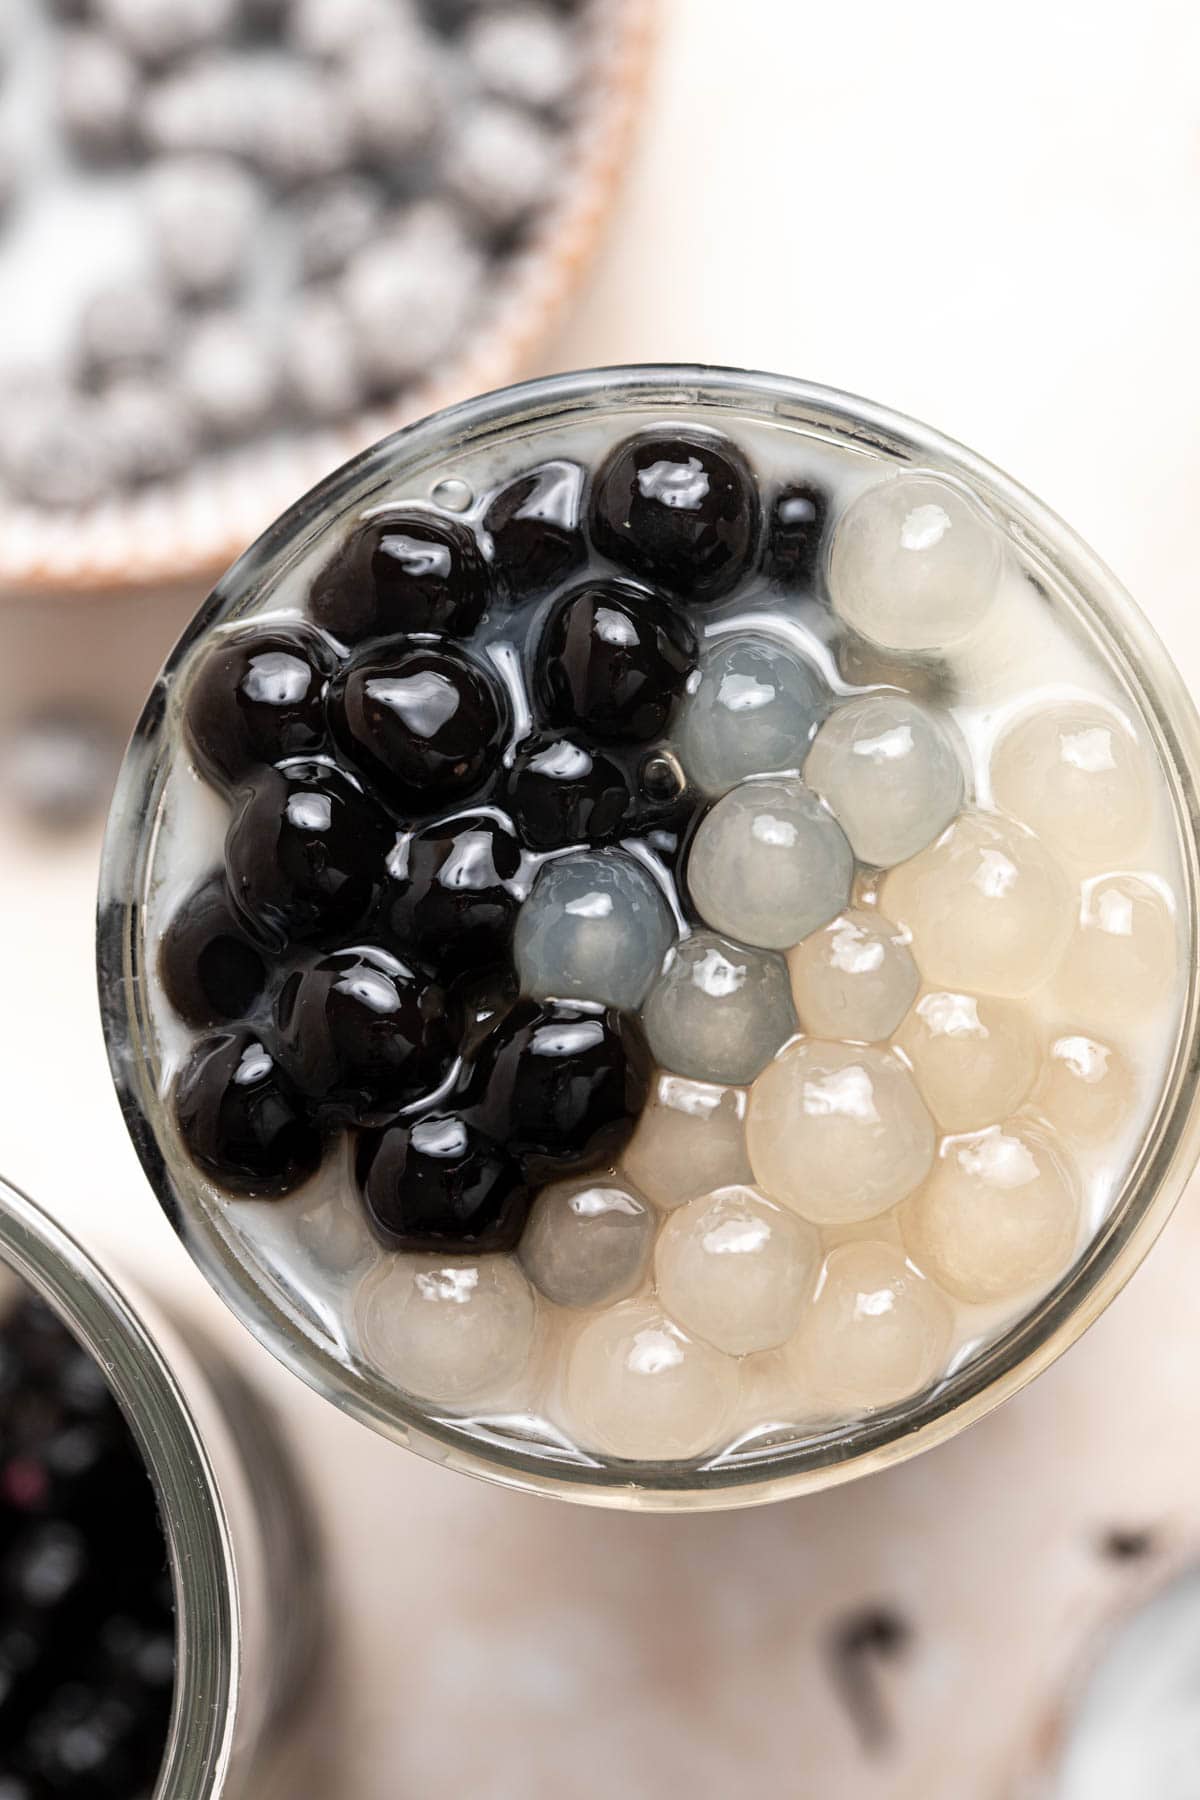 A close-up overhead view of a glass filled with white and black tapioca pearls.